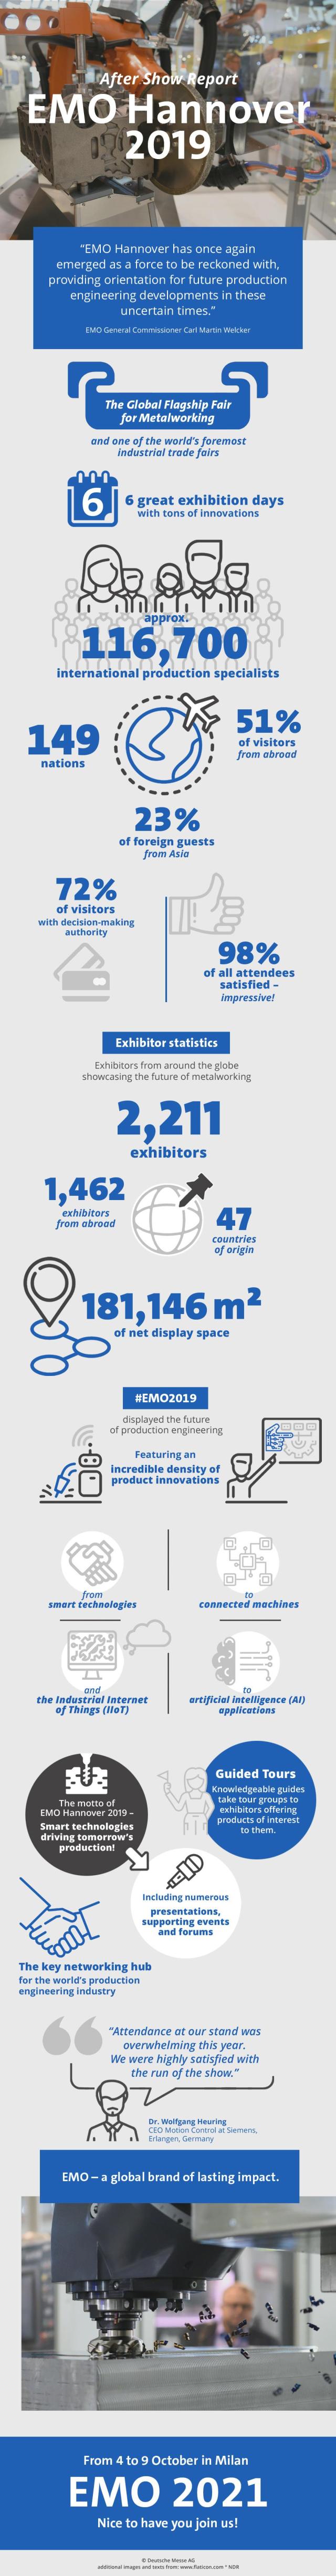 EMO 2019 in Numbers